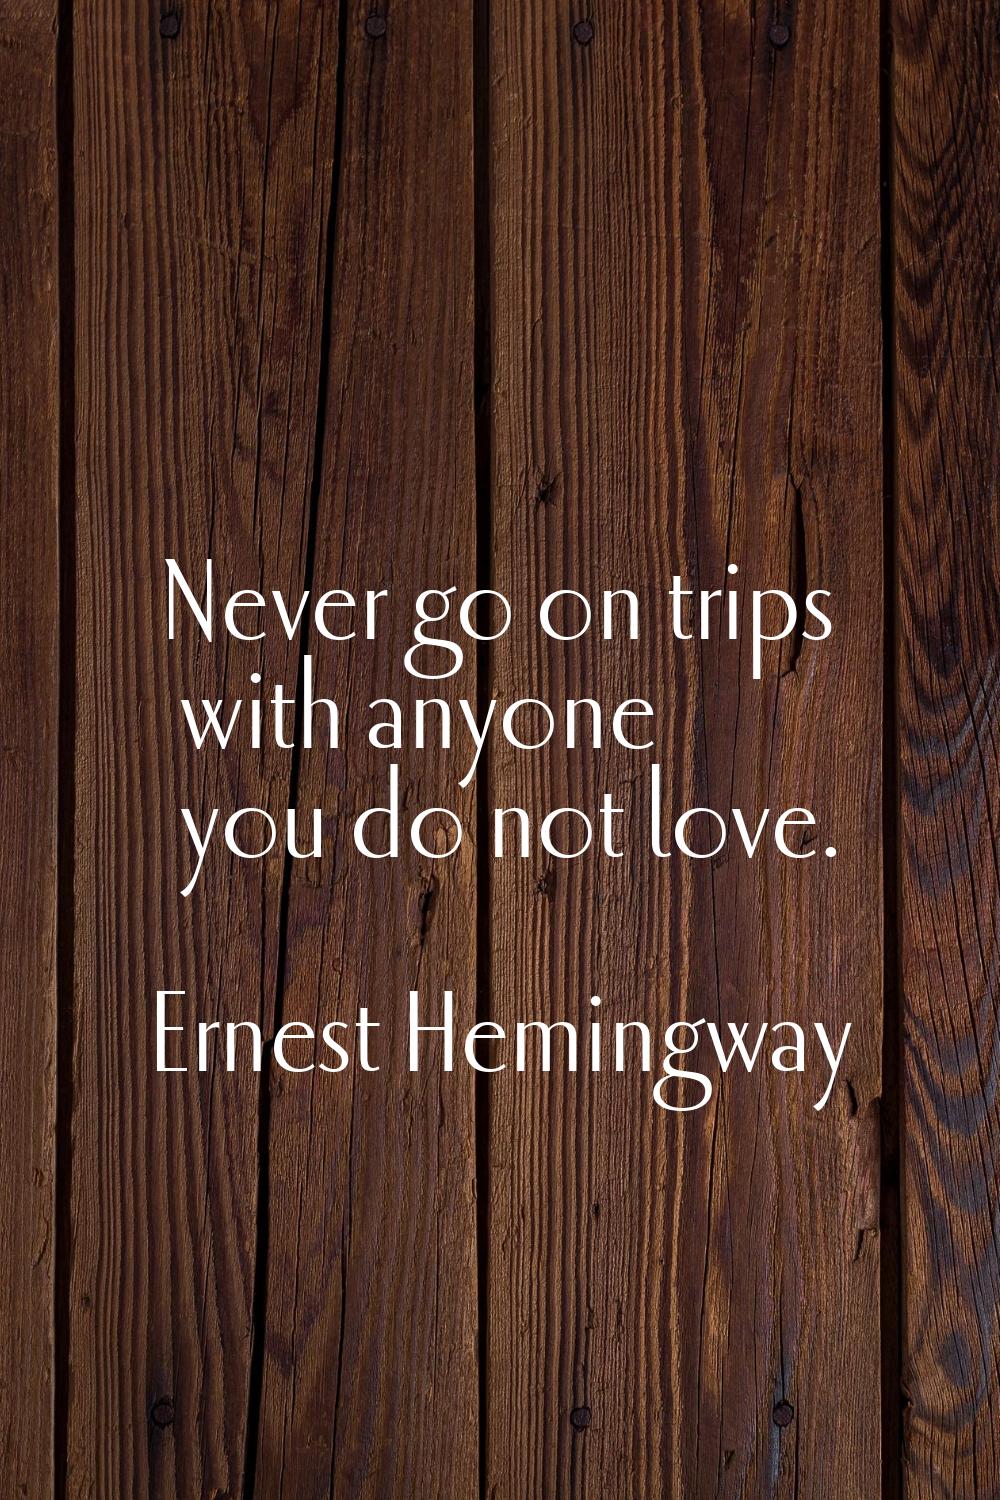 Never go on trips with anyone you do not love.